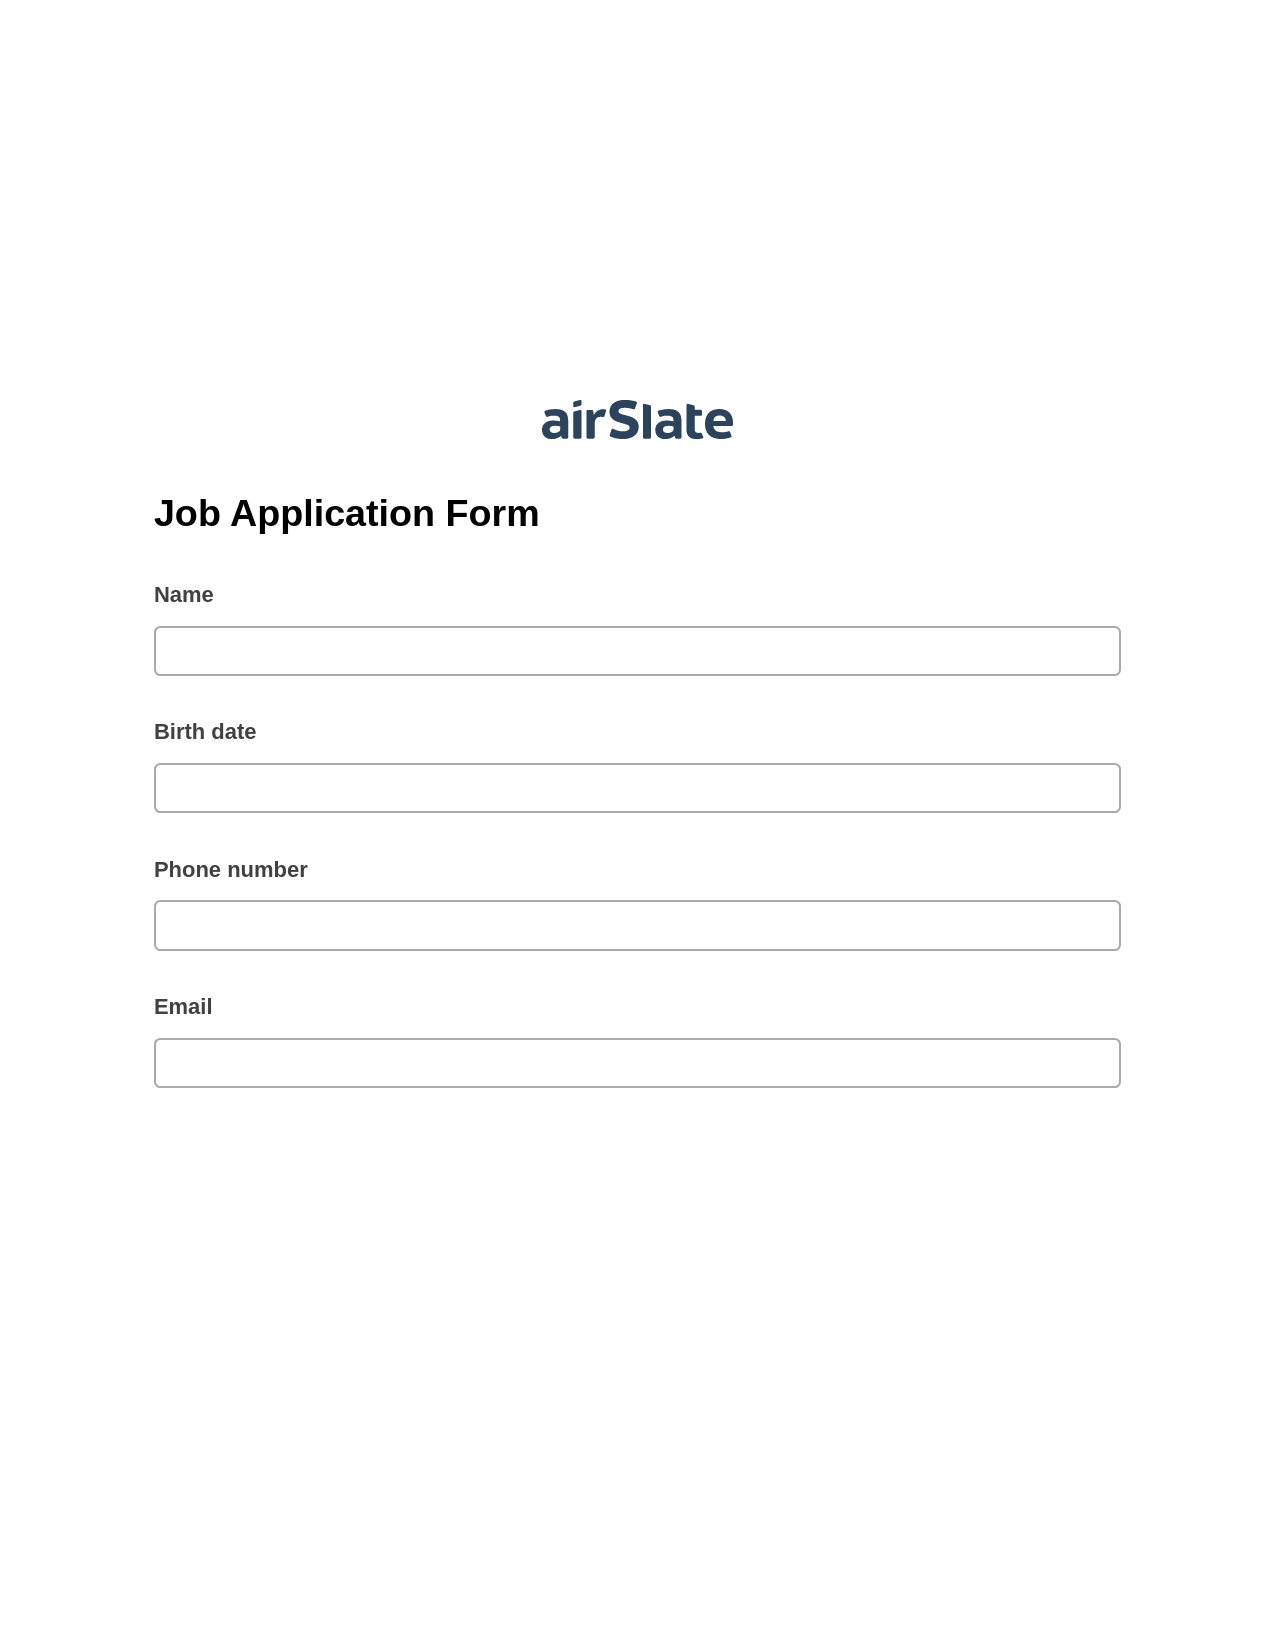 Multirole Job Application Form Pre-fill Document Bot, Send a Slate to Salesforce Contact Bot, Export to Formstack Documents Bot